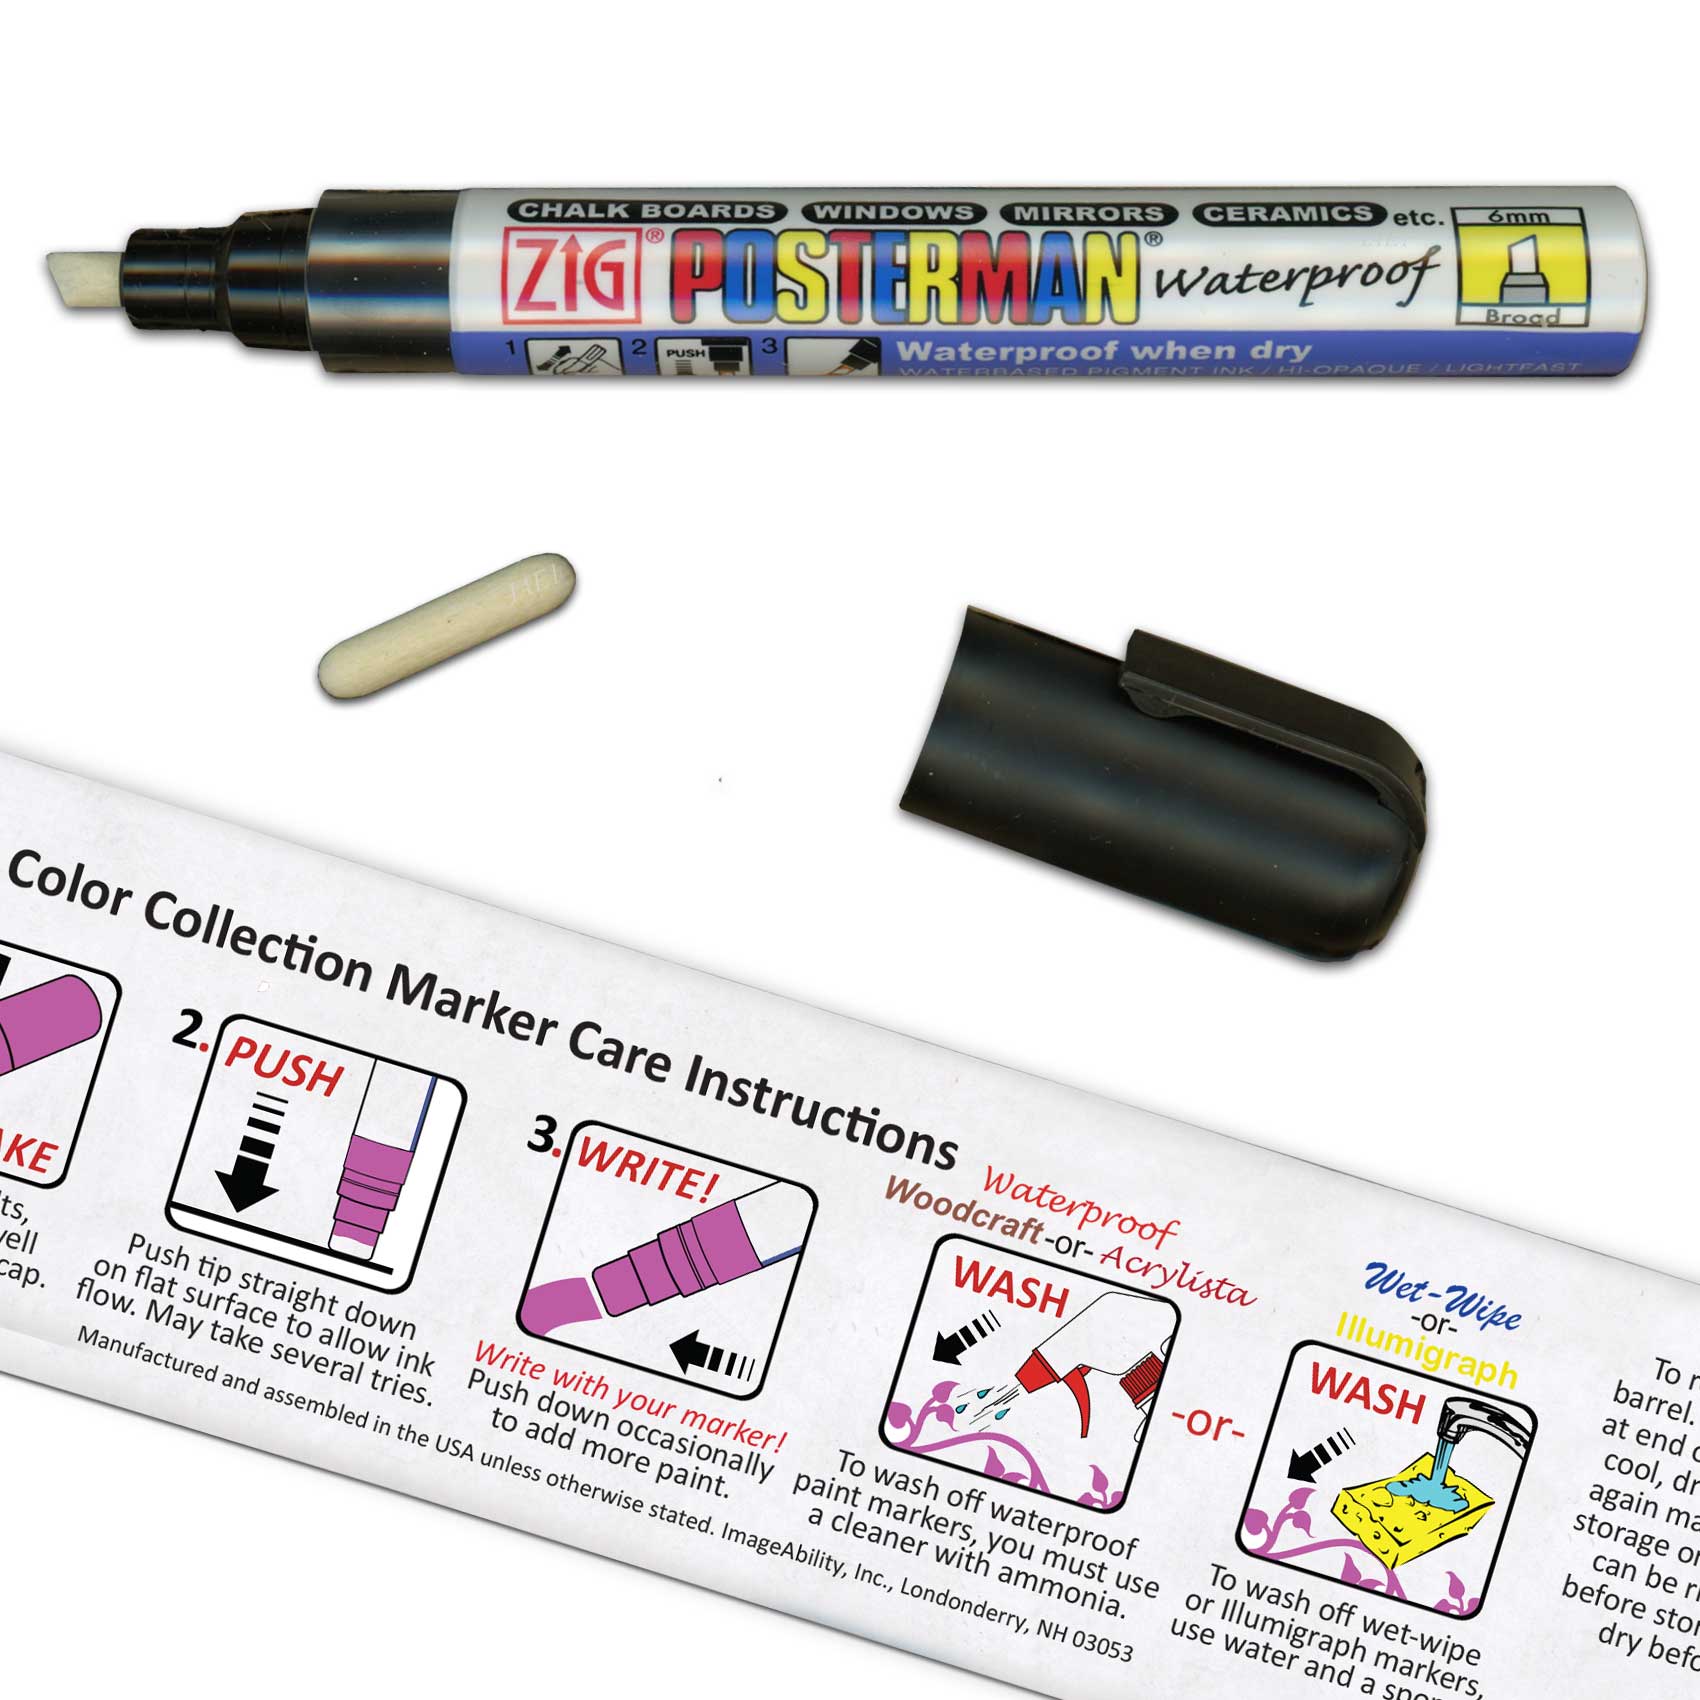 Color Collection Zig Posterman Waterproof 6mm Tip Black Marker with 2mm Tip, Black Cap, and Marker Priming and Care Instructions